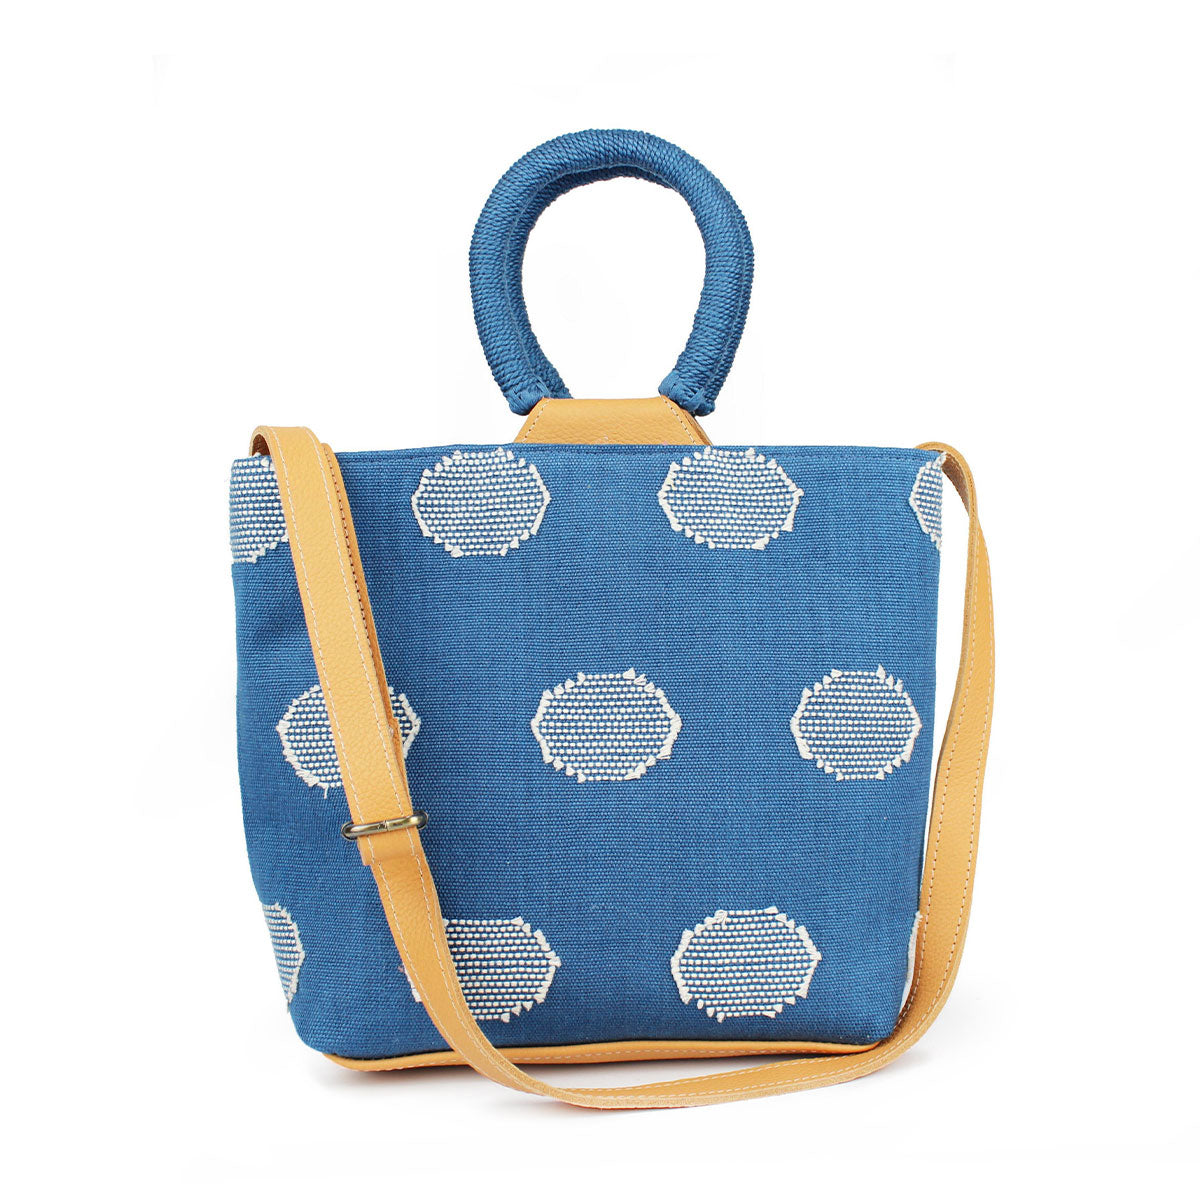 Front of the artisan Dalila Handwoven Tote in Ocean Blue. The tote has rounded handles coiled in blue thread. The Ocean Blue pattern has white circles over a blue background. It has a leather adjustable strap.